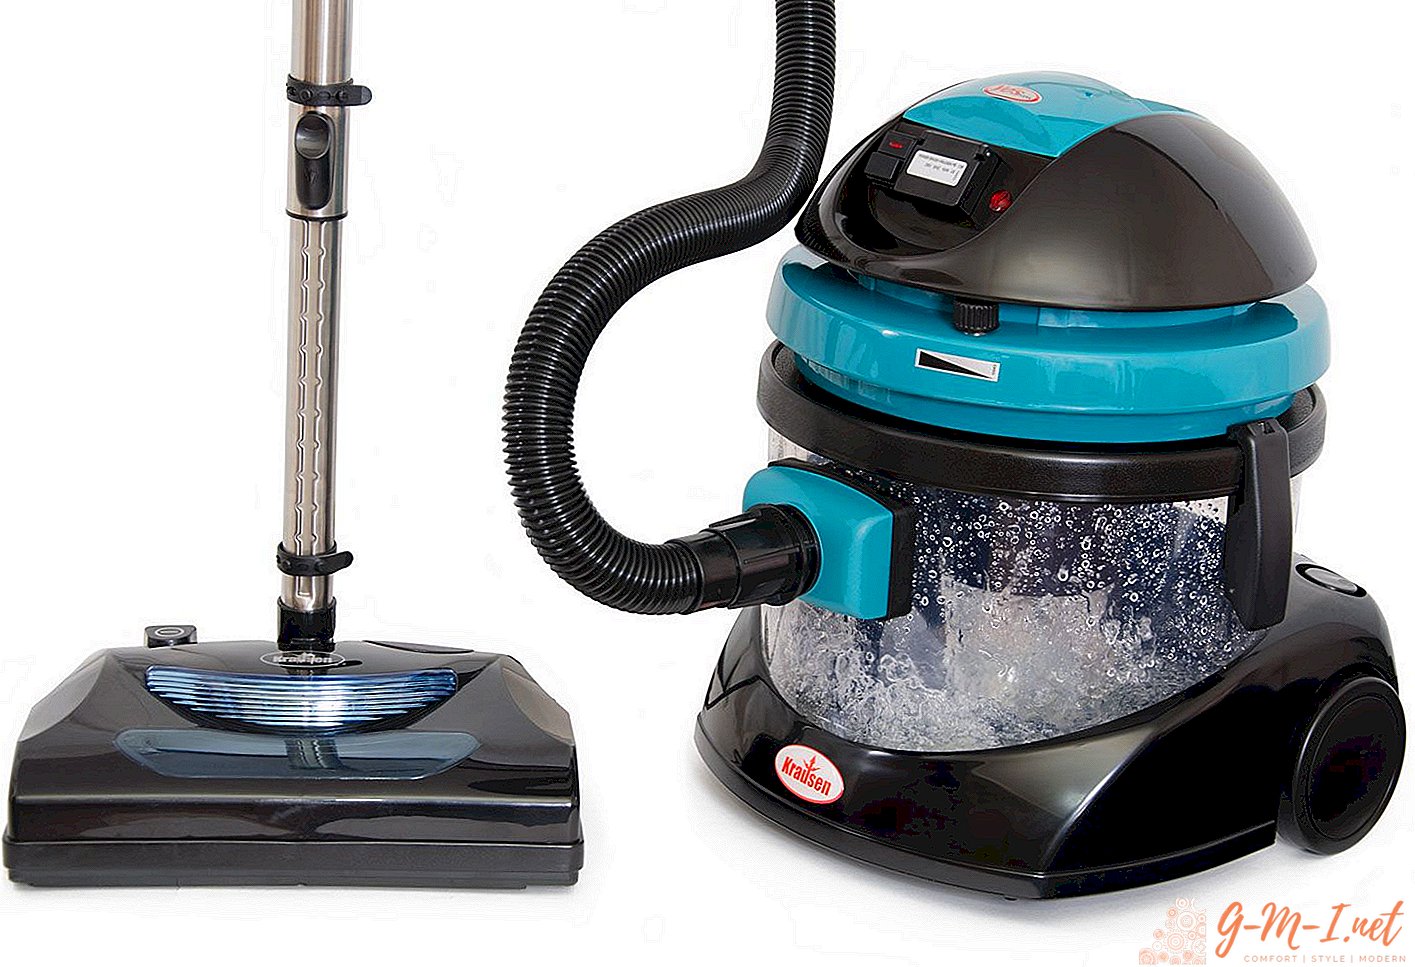 How to use a washing vacuum cleaner